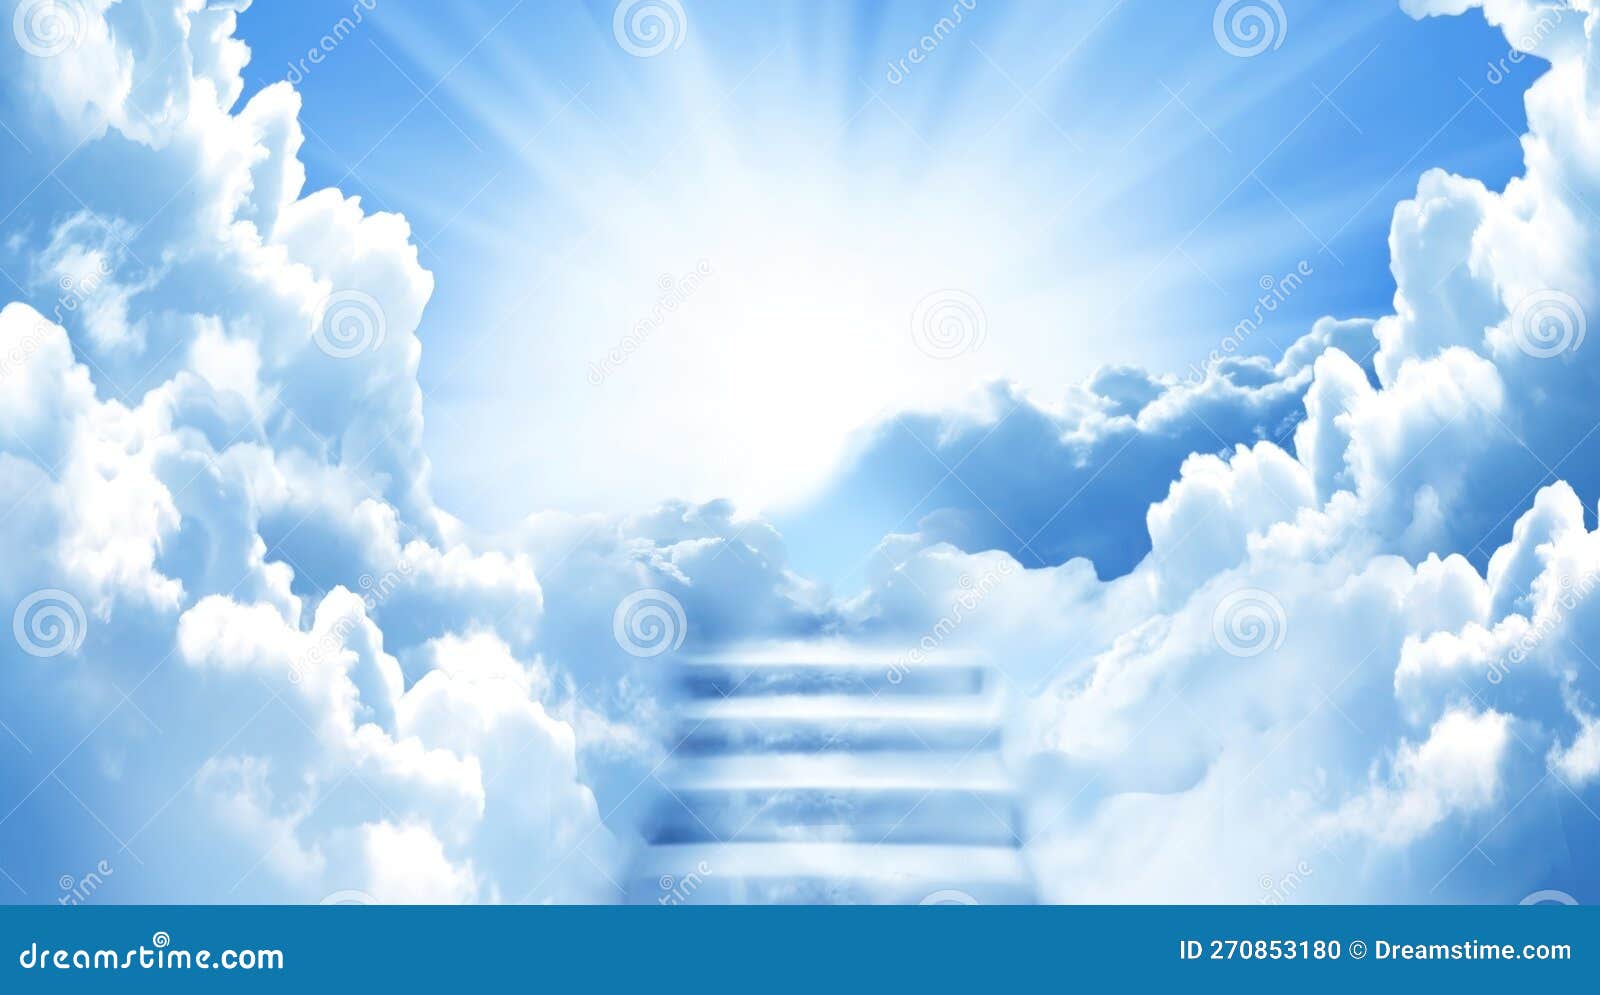 stairway to heaven.stairs in sky. concept with sun and clouds. religion background with copy space